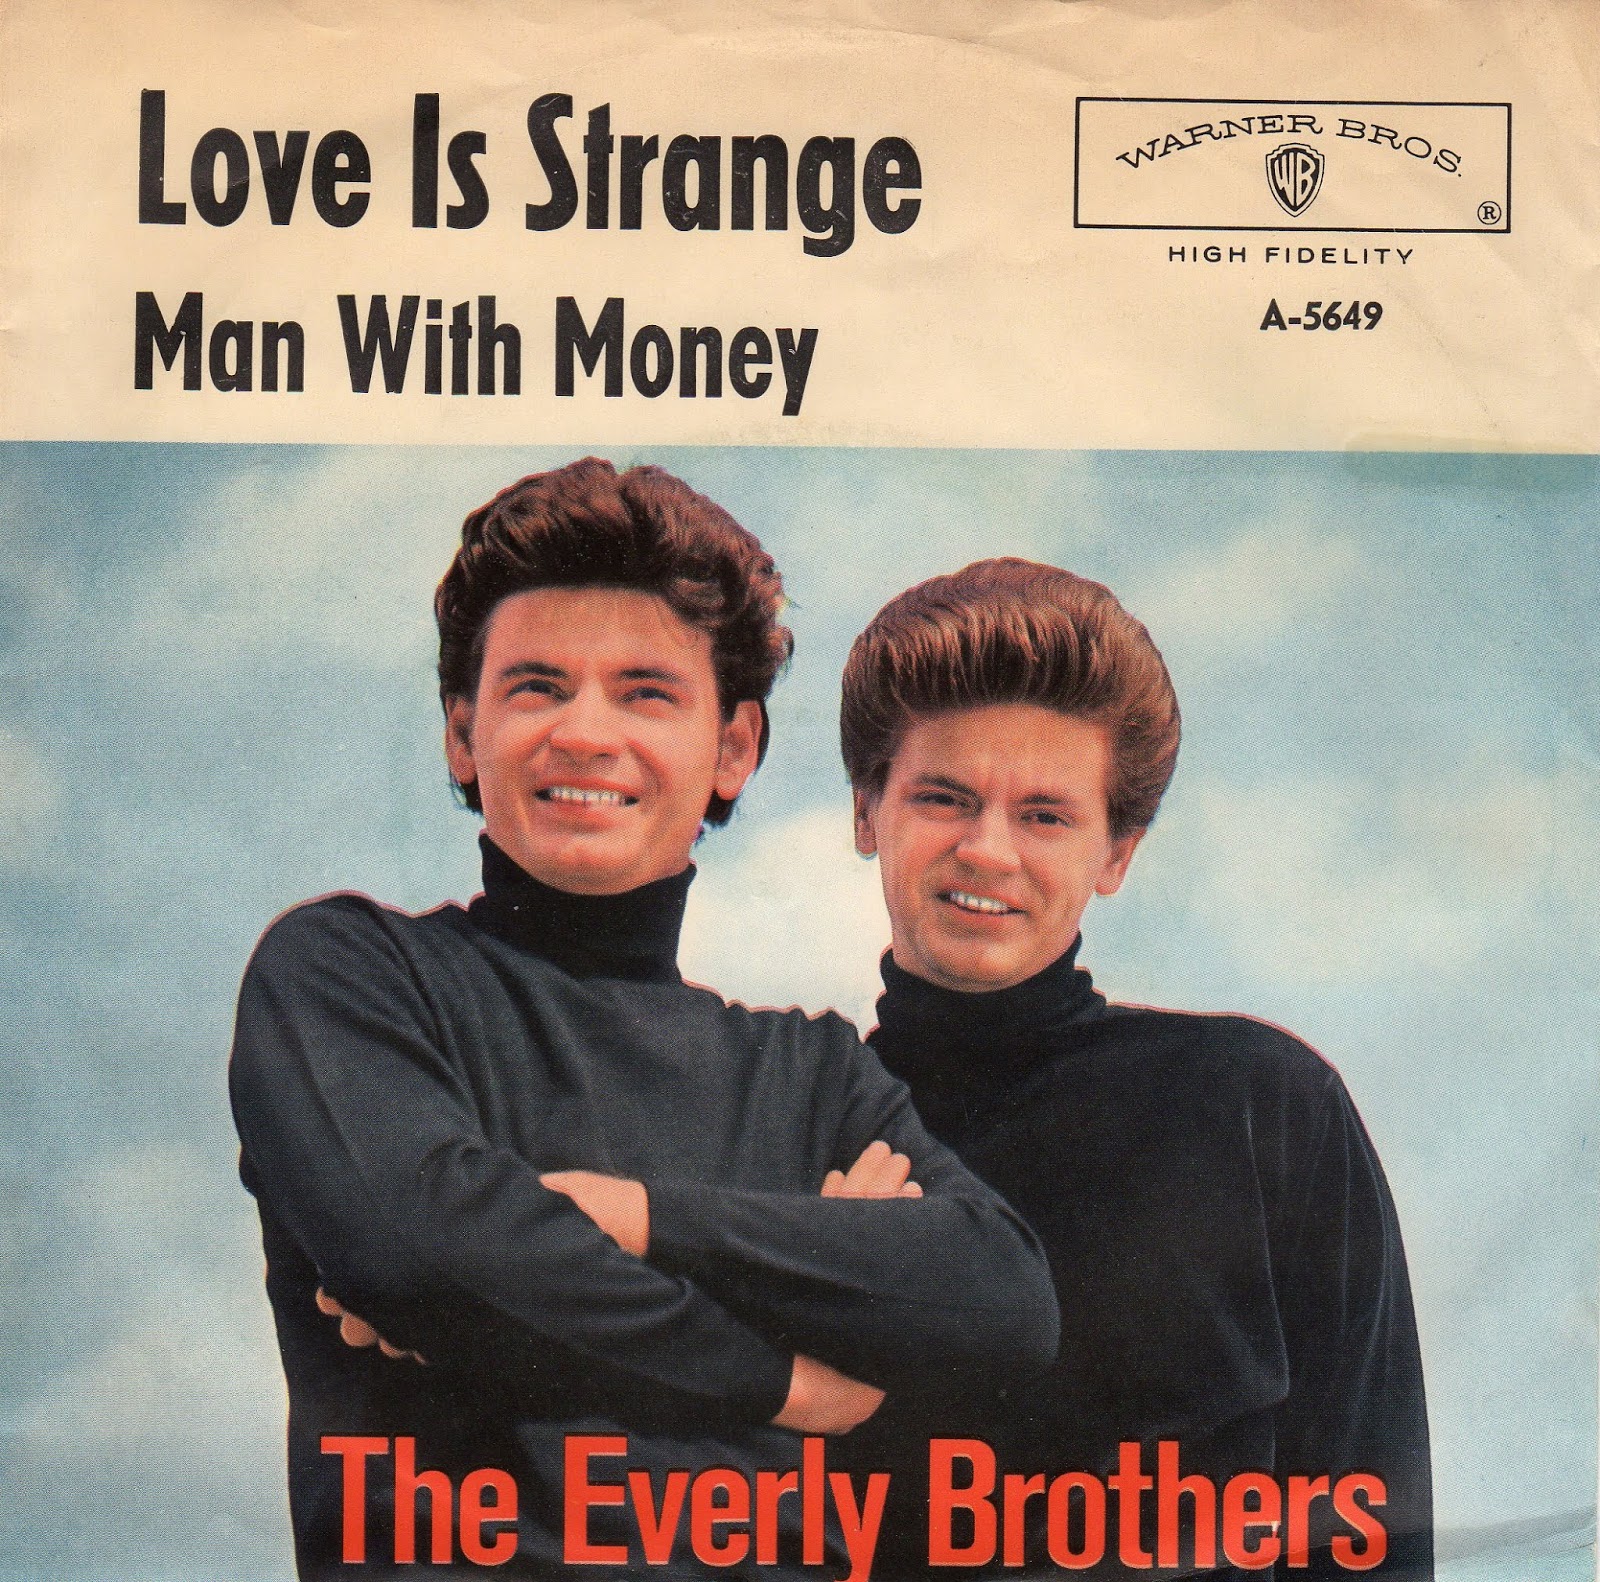 Brothers дискография. Crying in the Rain the Everly brothers. The Everly brothers - обложка. Brother lovers. The Everly brothers devoted to you.